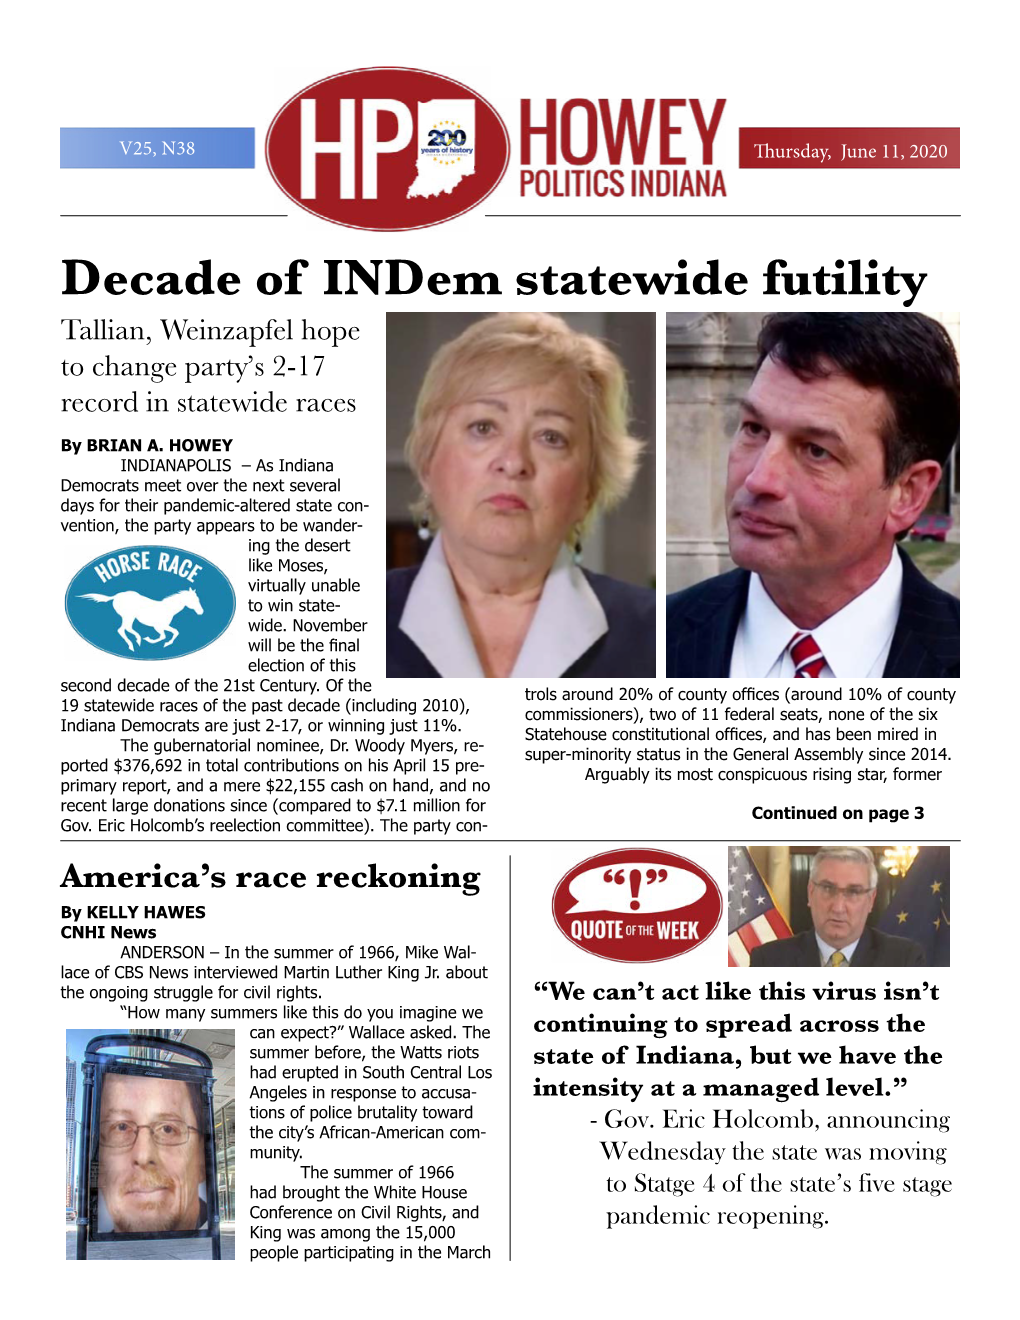 Decade of Indem Statewide Futility Tallian, Weinzapfel Hope to Change Party’S 2-17 Record in Statewide Races by BRIAN A